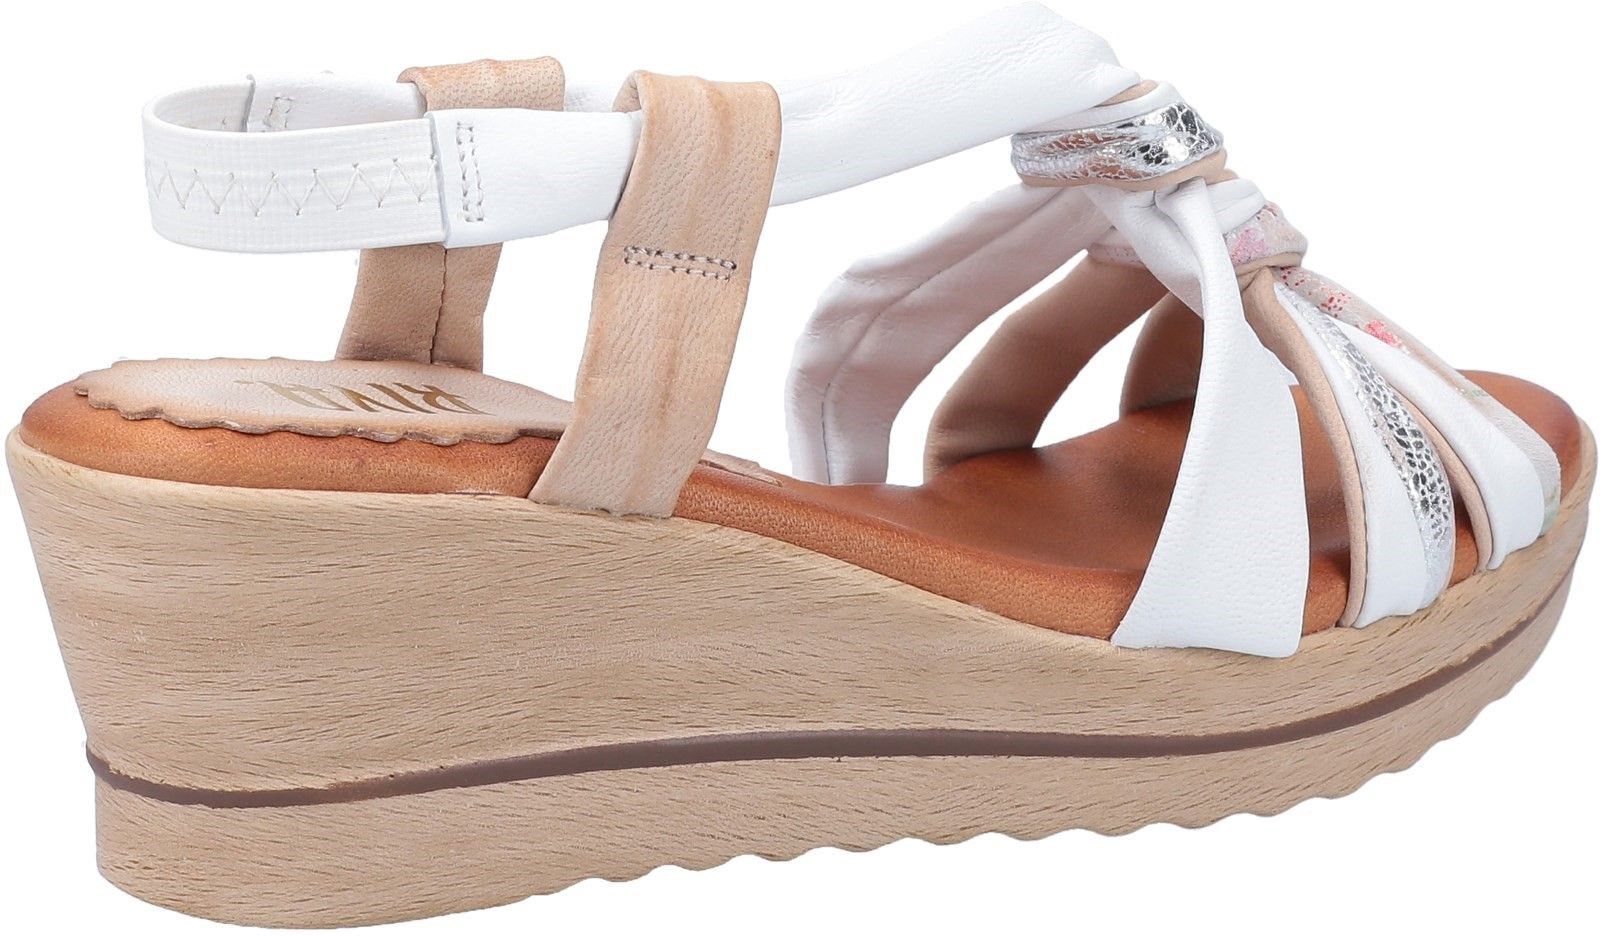 Riva Perpignan is a womens slip on slingback summer sandal with wedge heel, platform sole and soft, plait detail leather uppers.